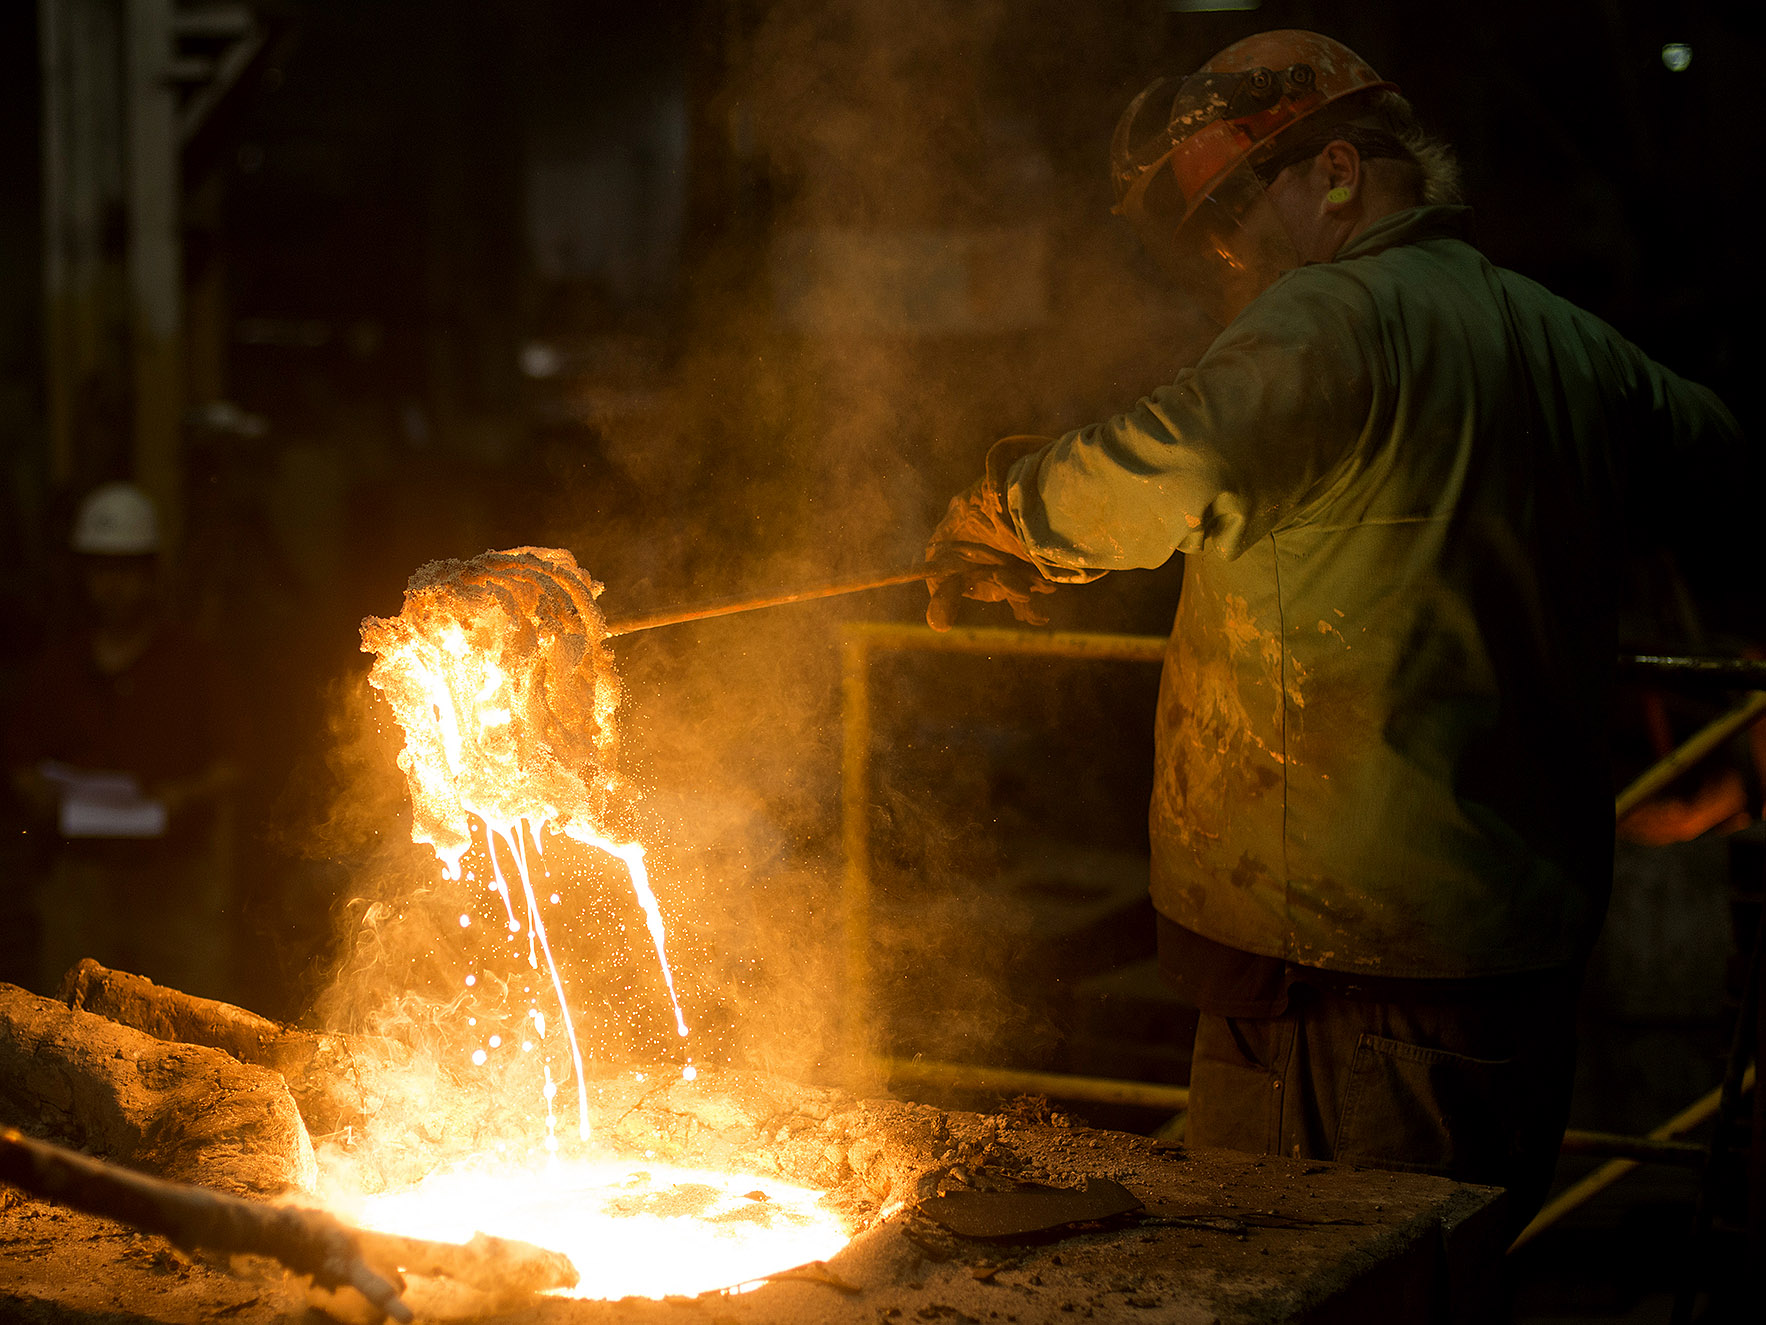 A worker removes slag, a stony waste substance created from the smelting process, from molten metal in a ladle at a facility in Salem, Ohio.